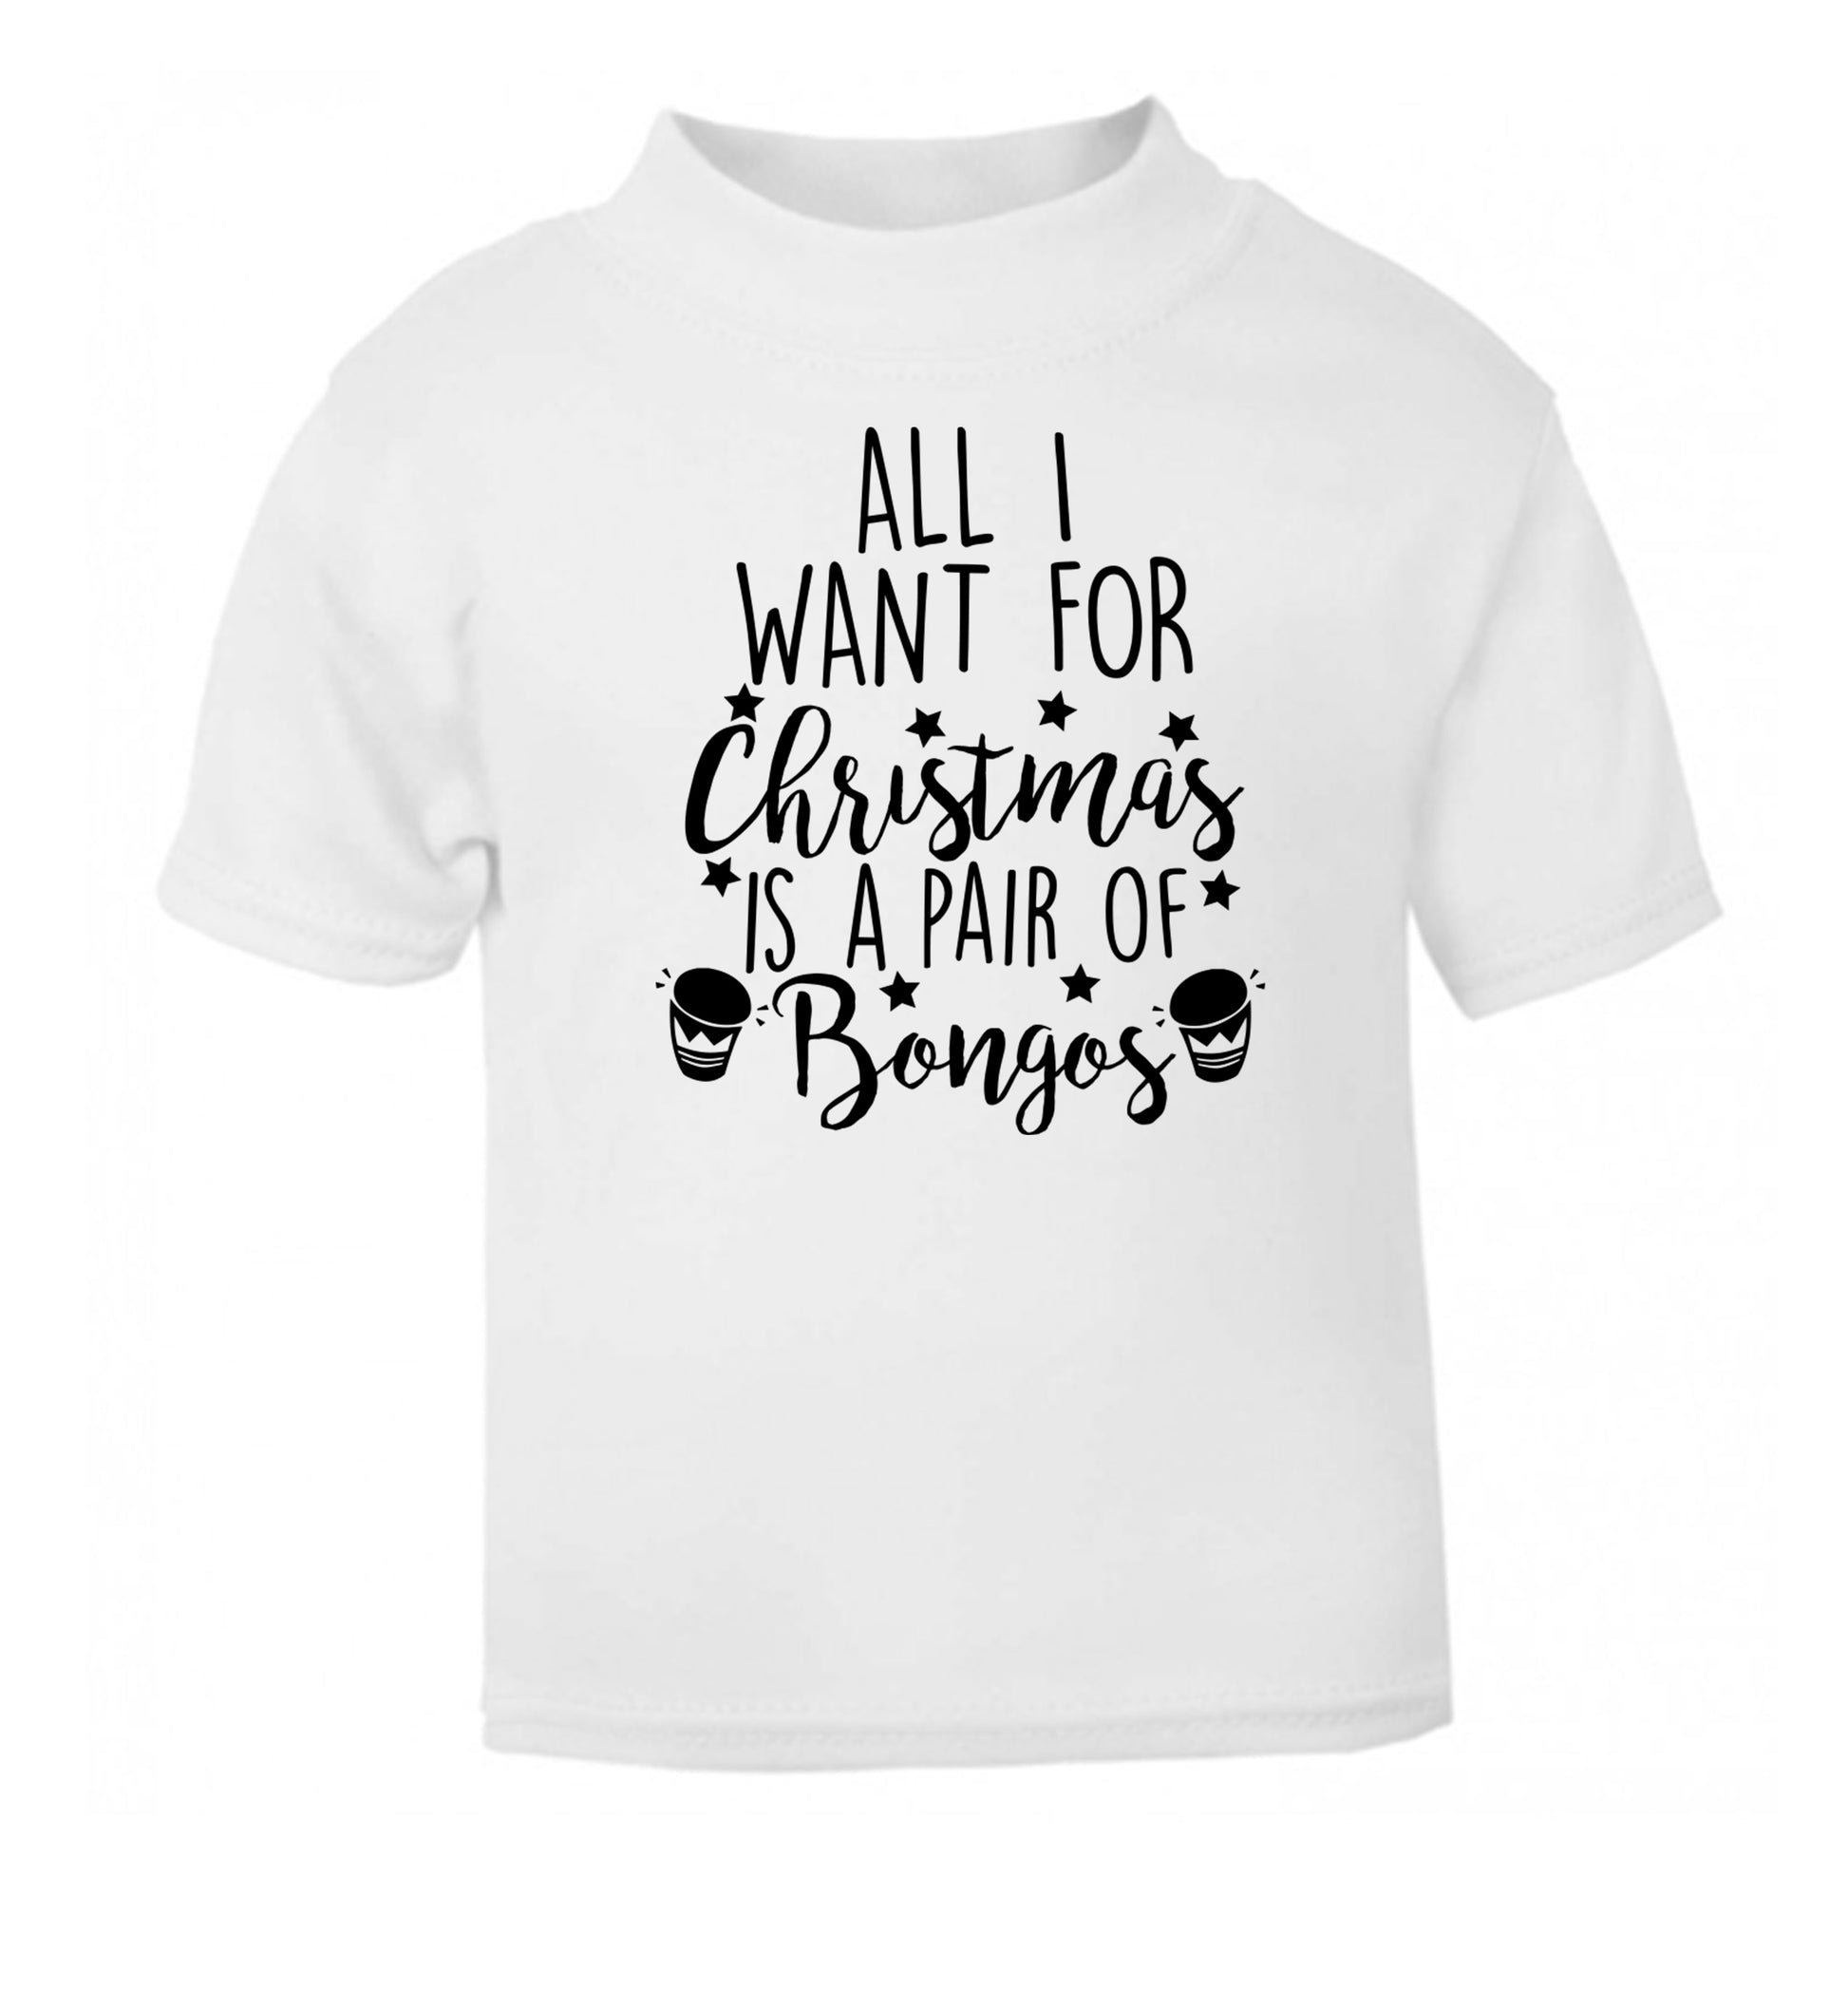 All I want for Christmas is a pair of bongos! white Baby Toddler Tshirt 2 Years